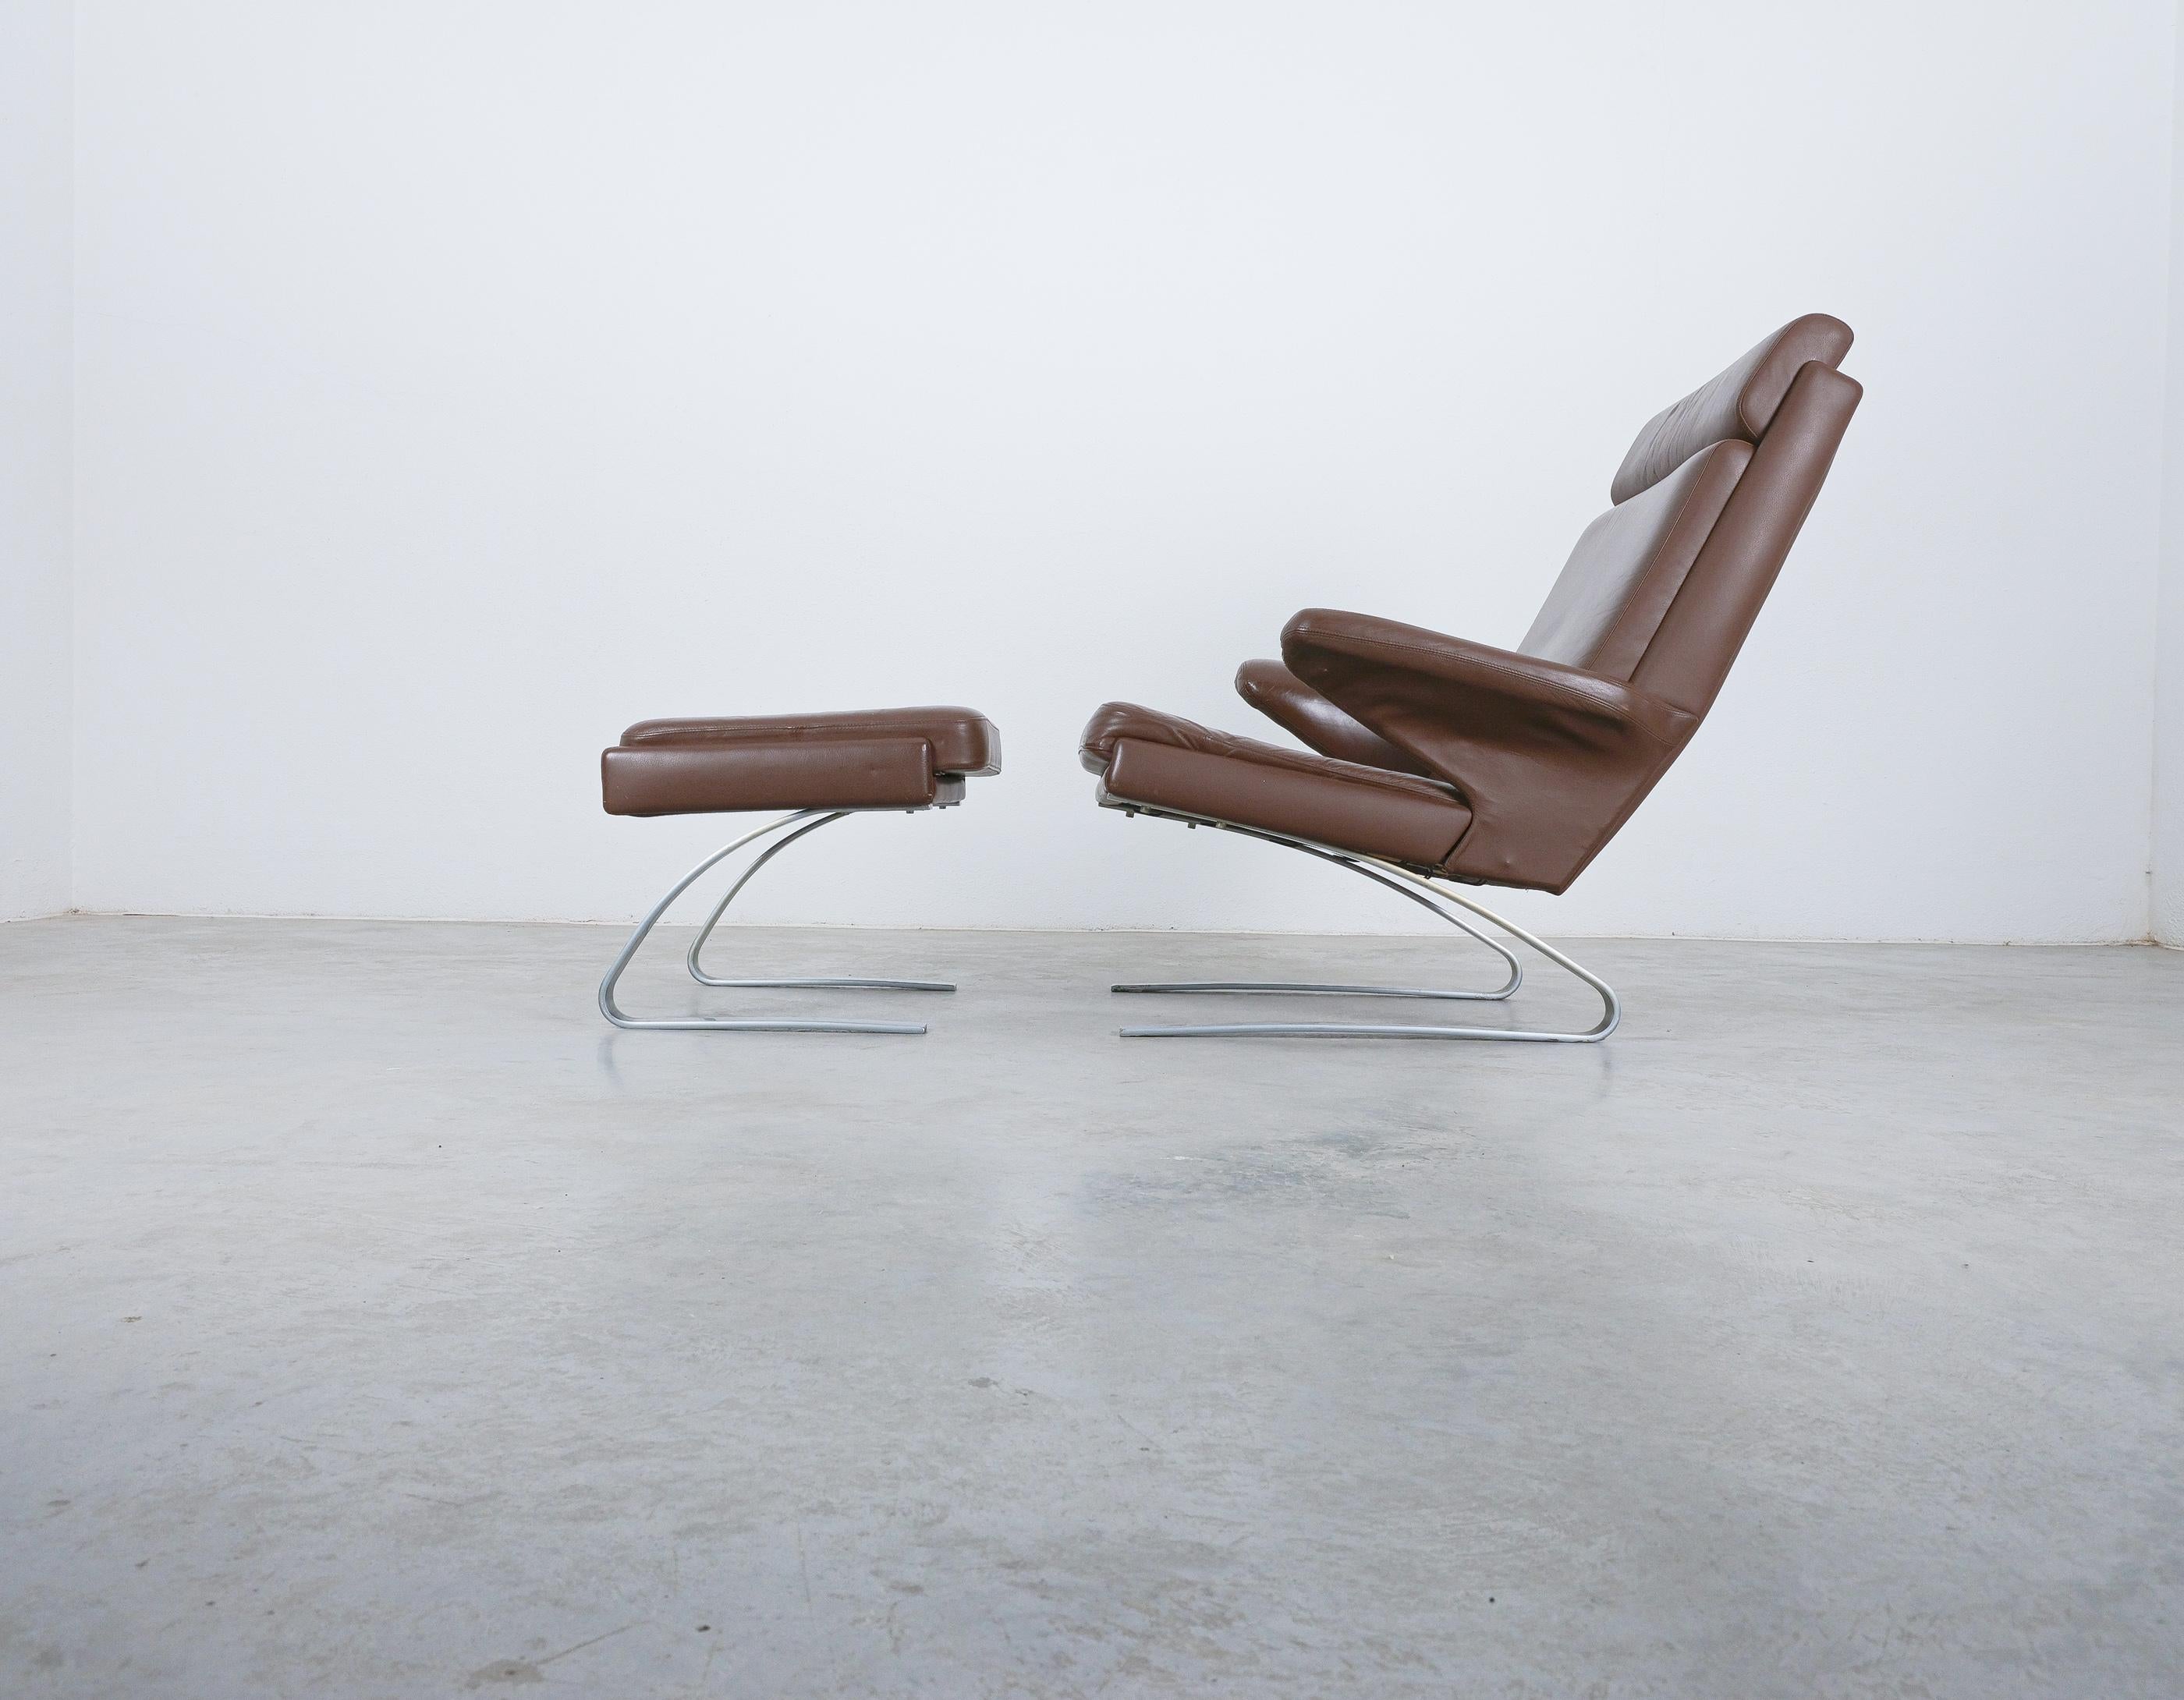 COR Swing Leather Lounge Chair by Reinhold Adolf & Hans-Jürgen Schröpfer, 1976

Original Swing chair + ottoman with its original smooth and unharmed aniline leather. The original leather from this chair is still in great condition and was executed